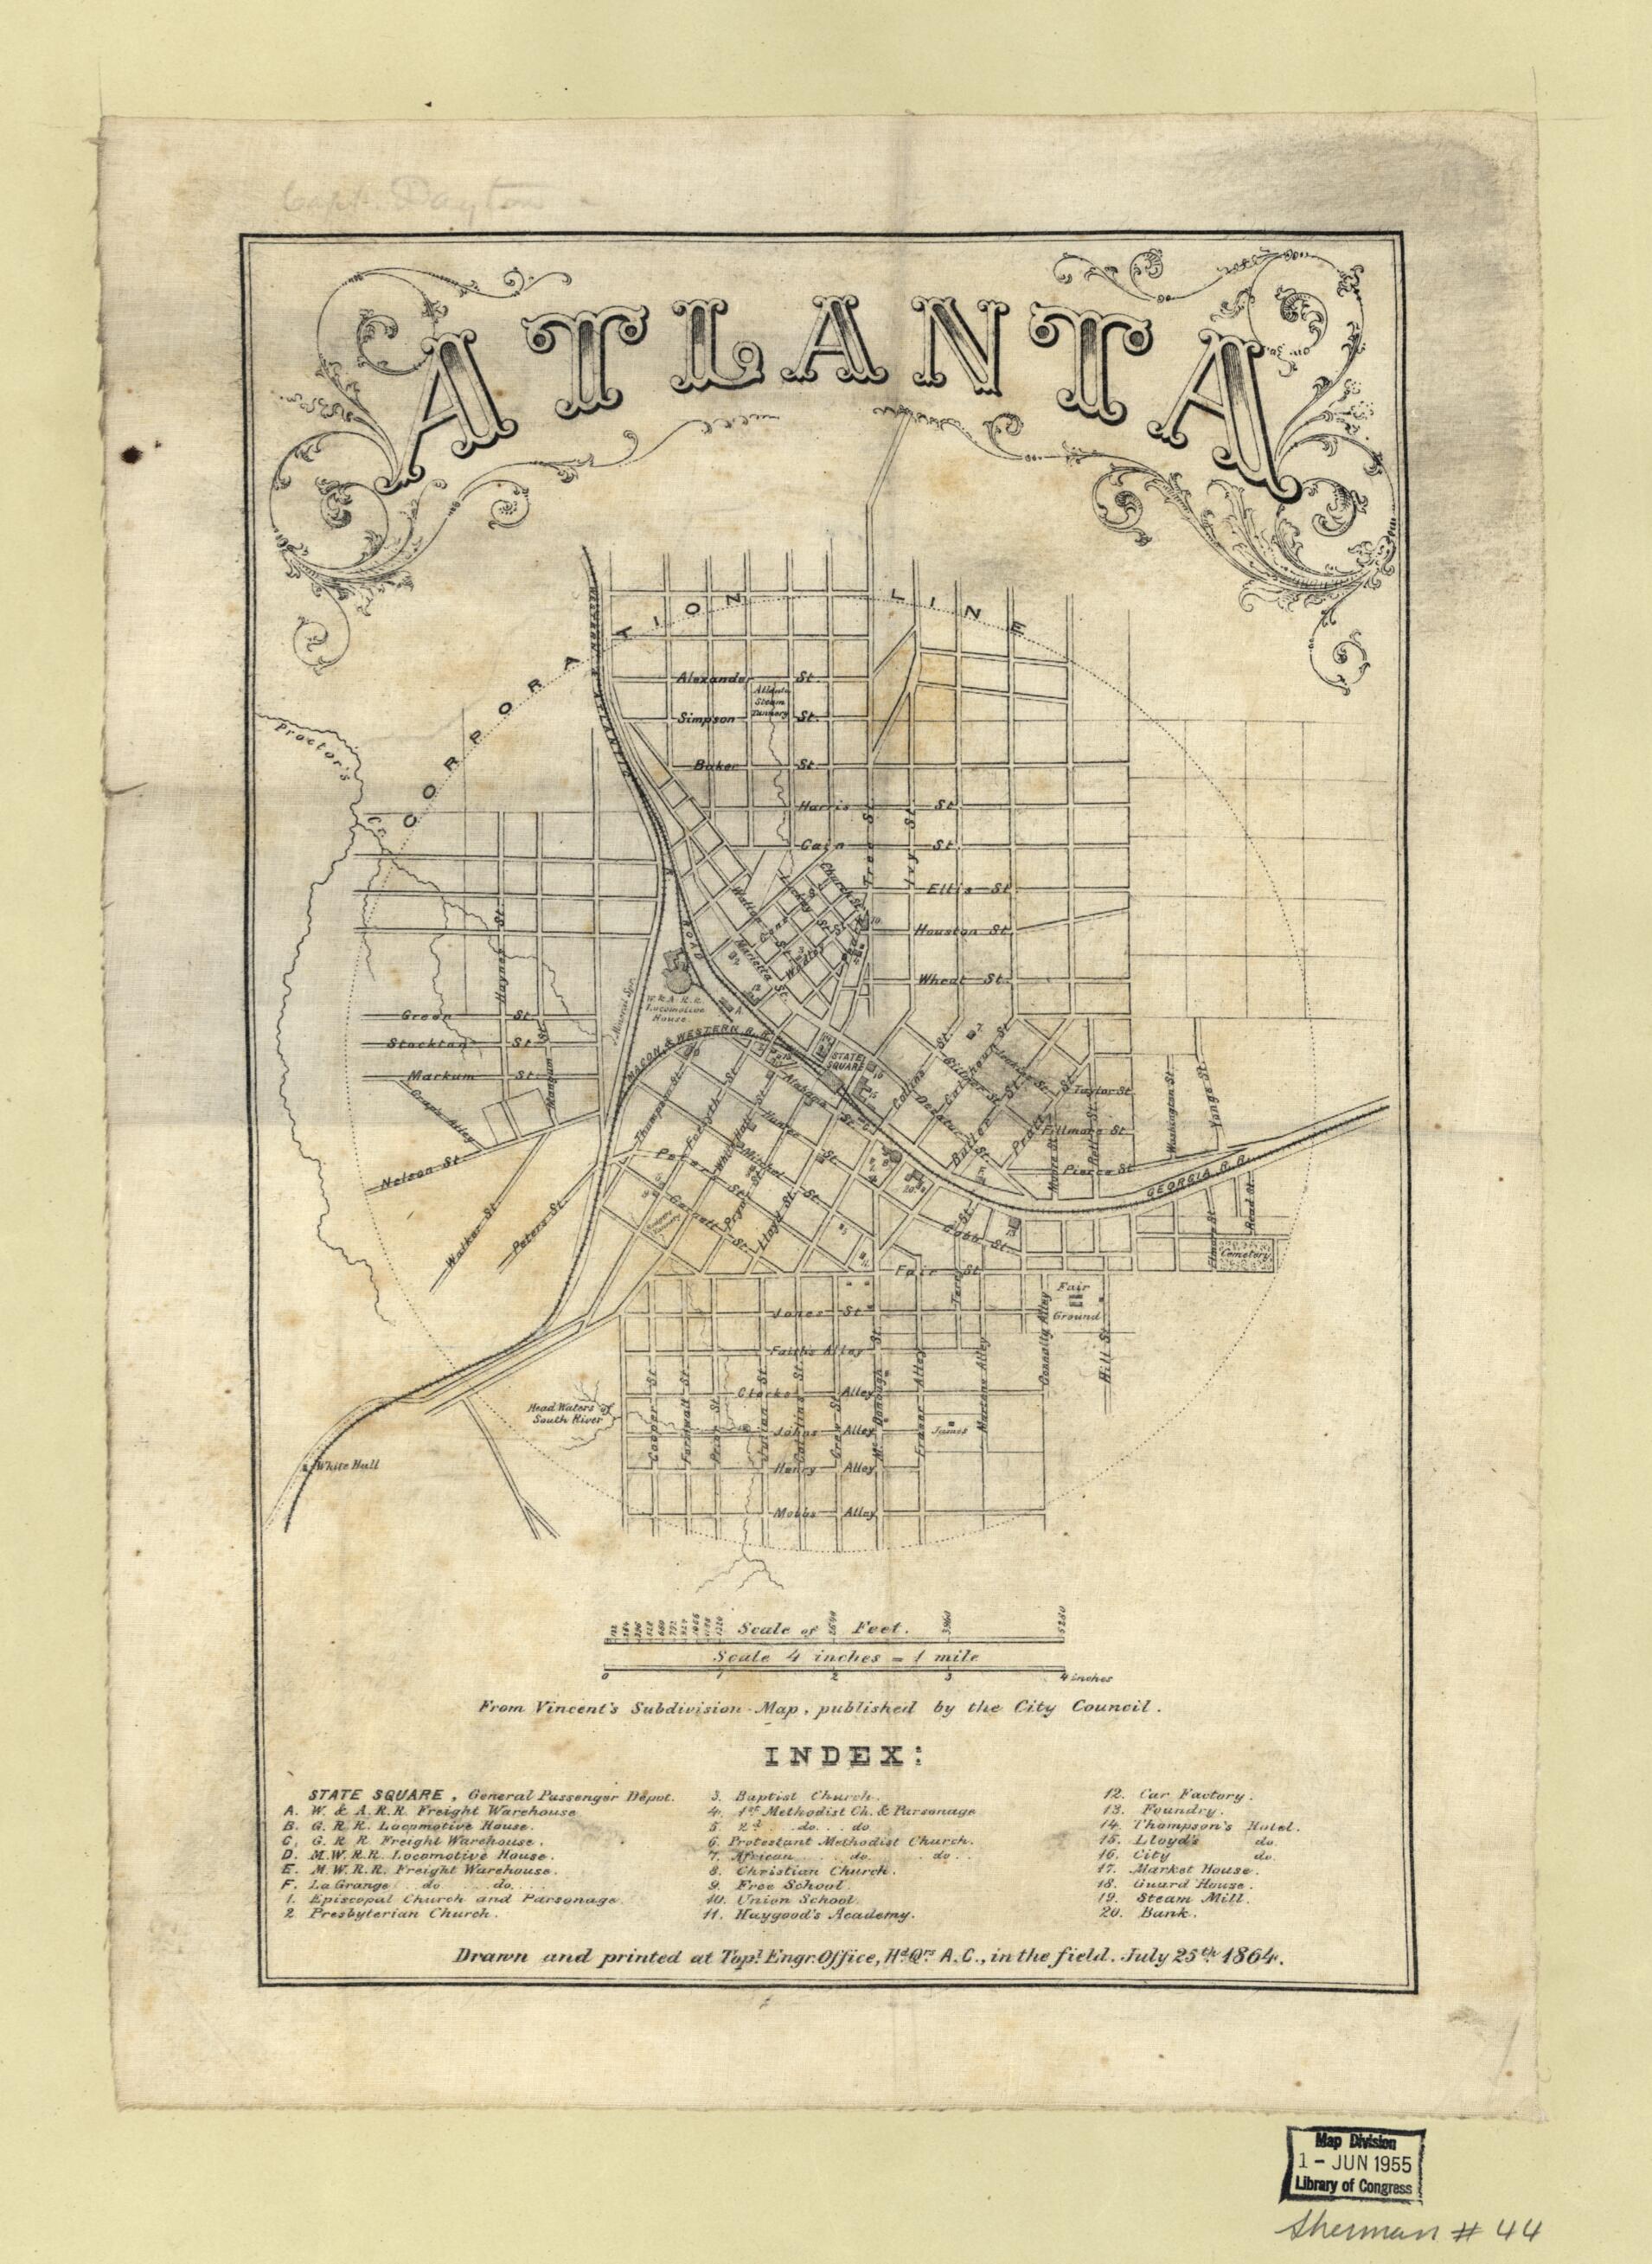 This old map of Atlanta : from Vincent&